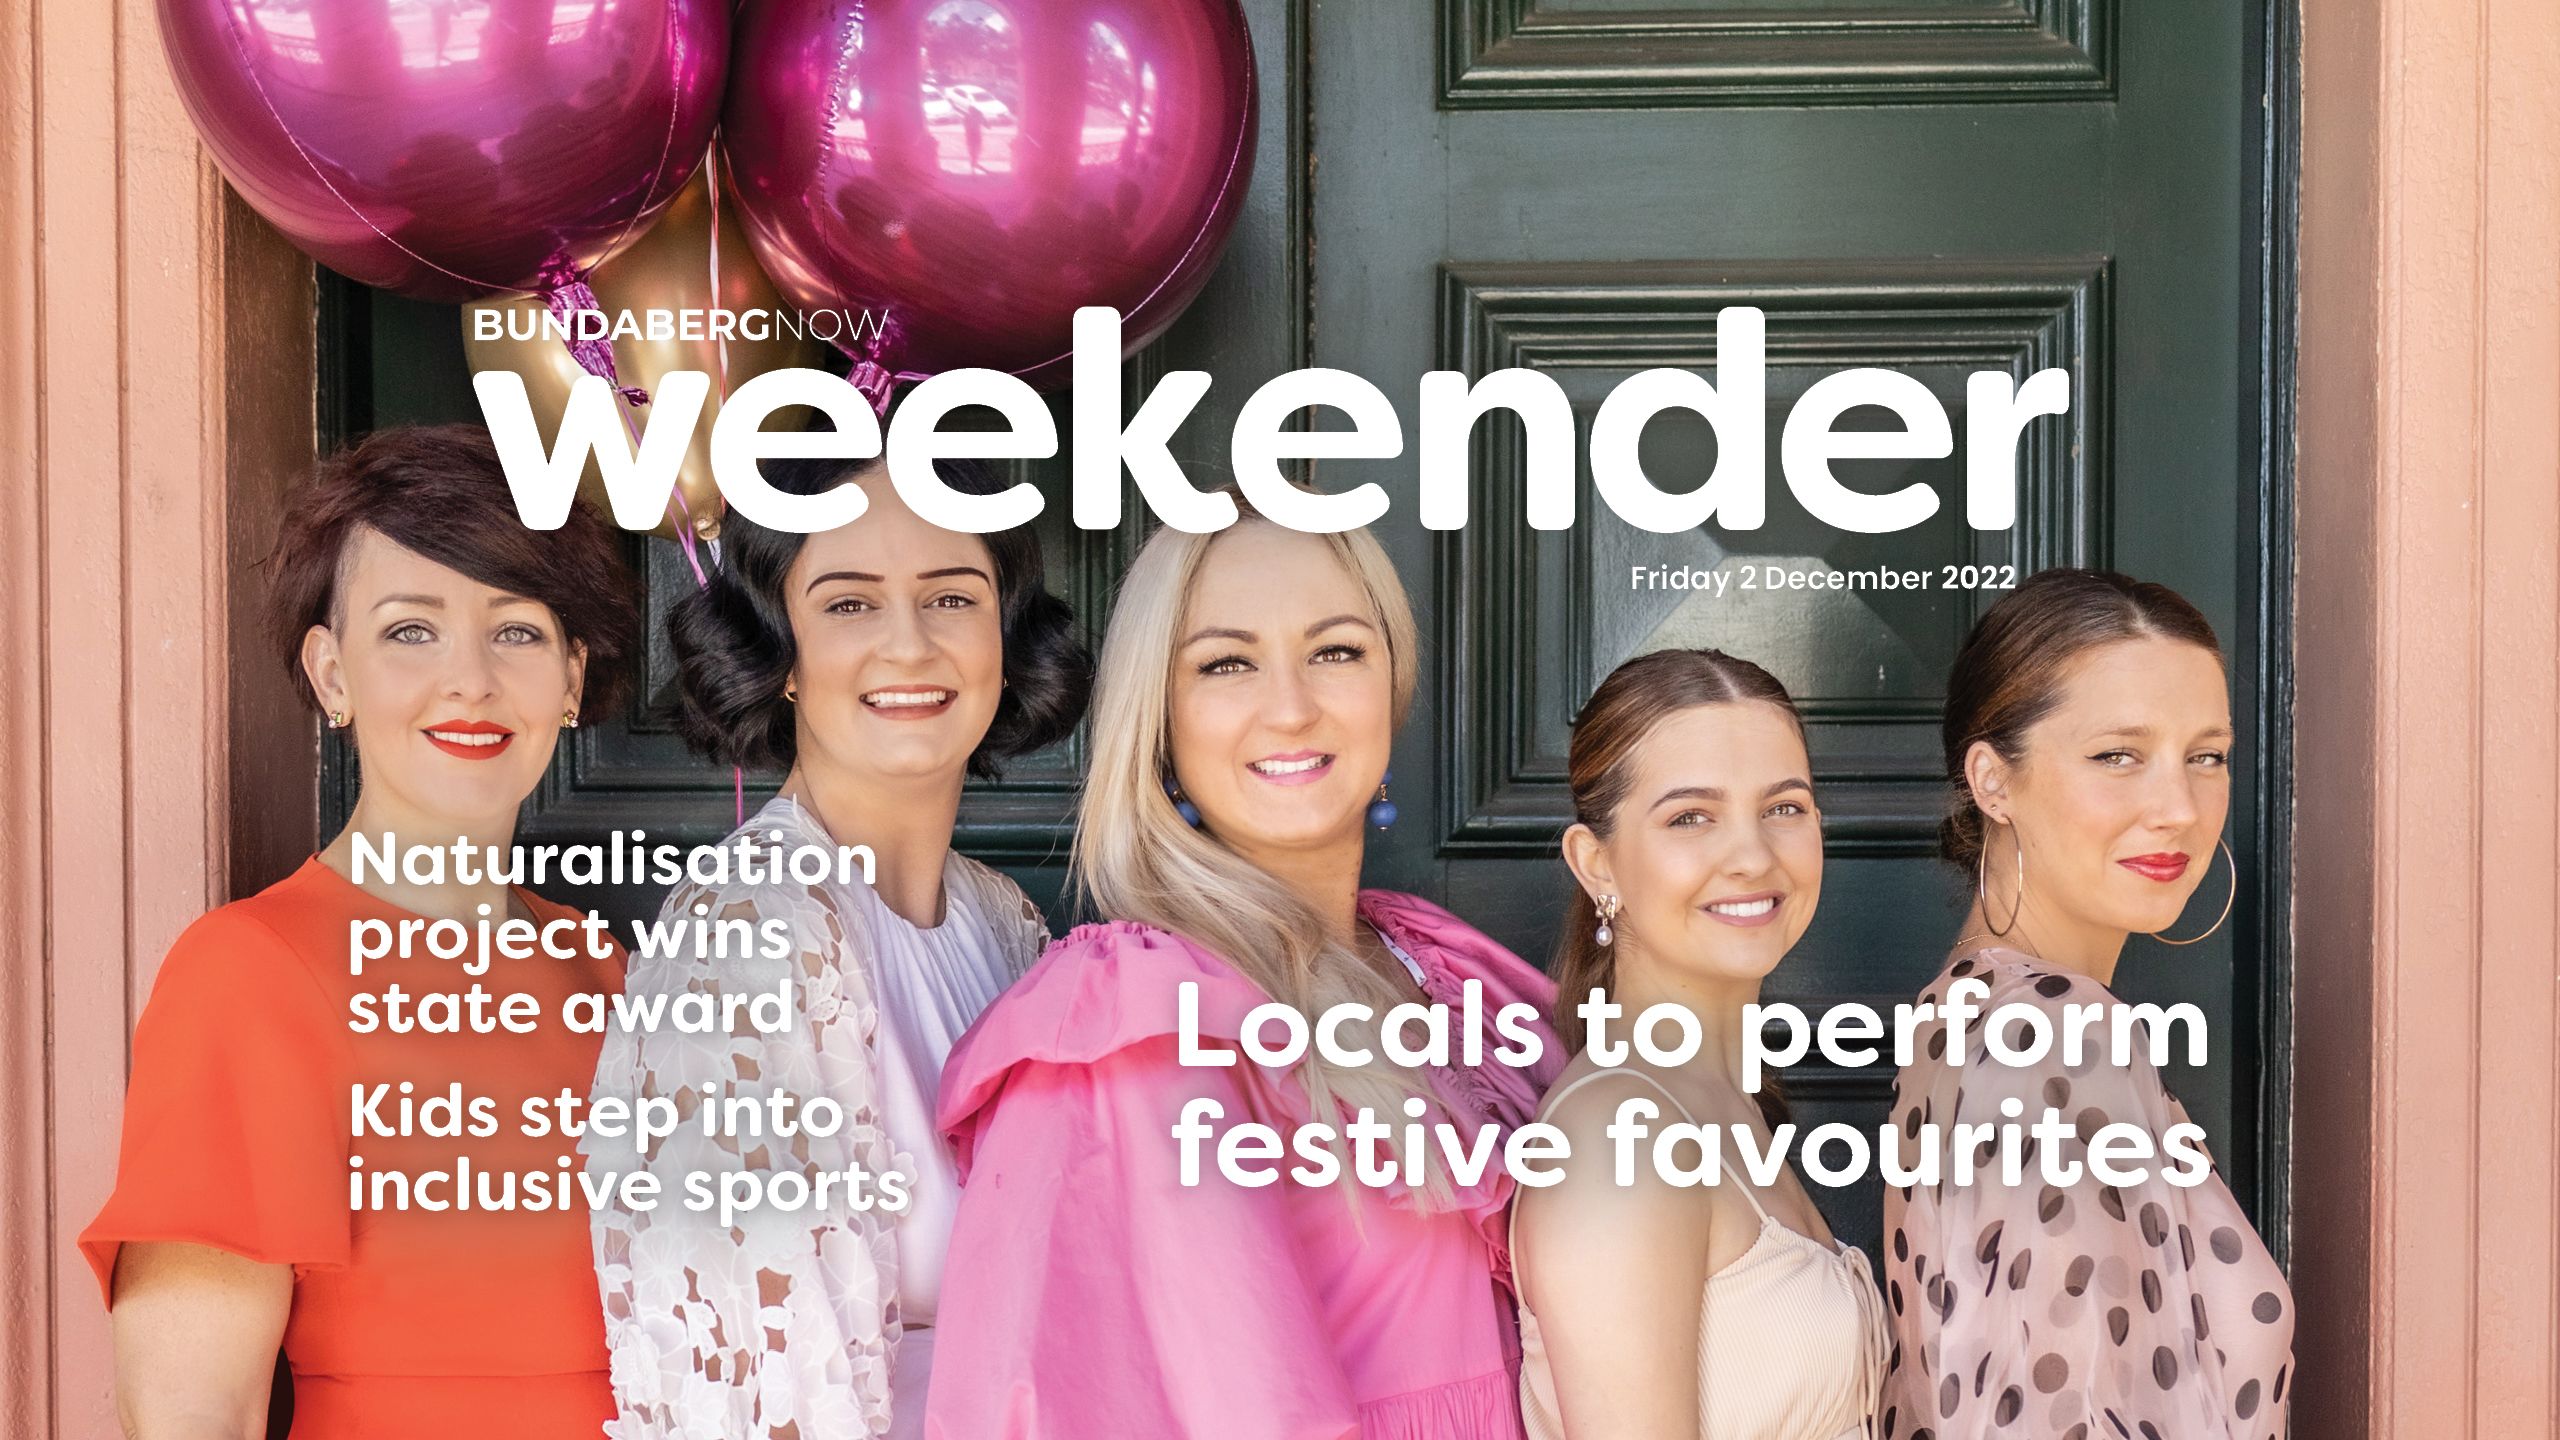 Weekender: Locals to perform festive favourites